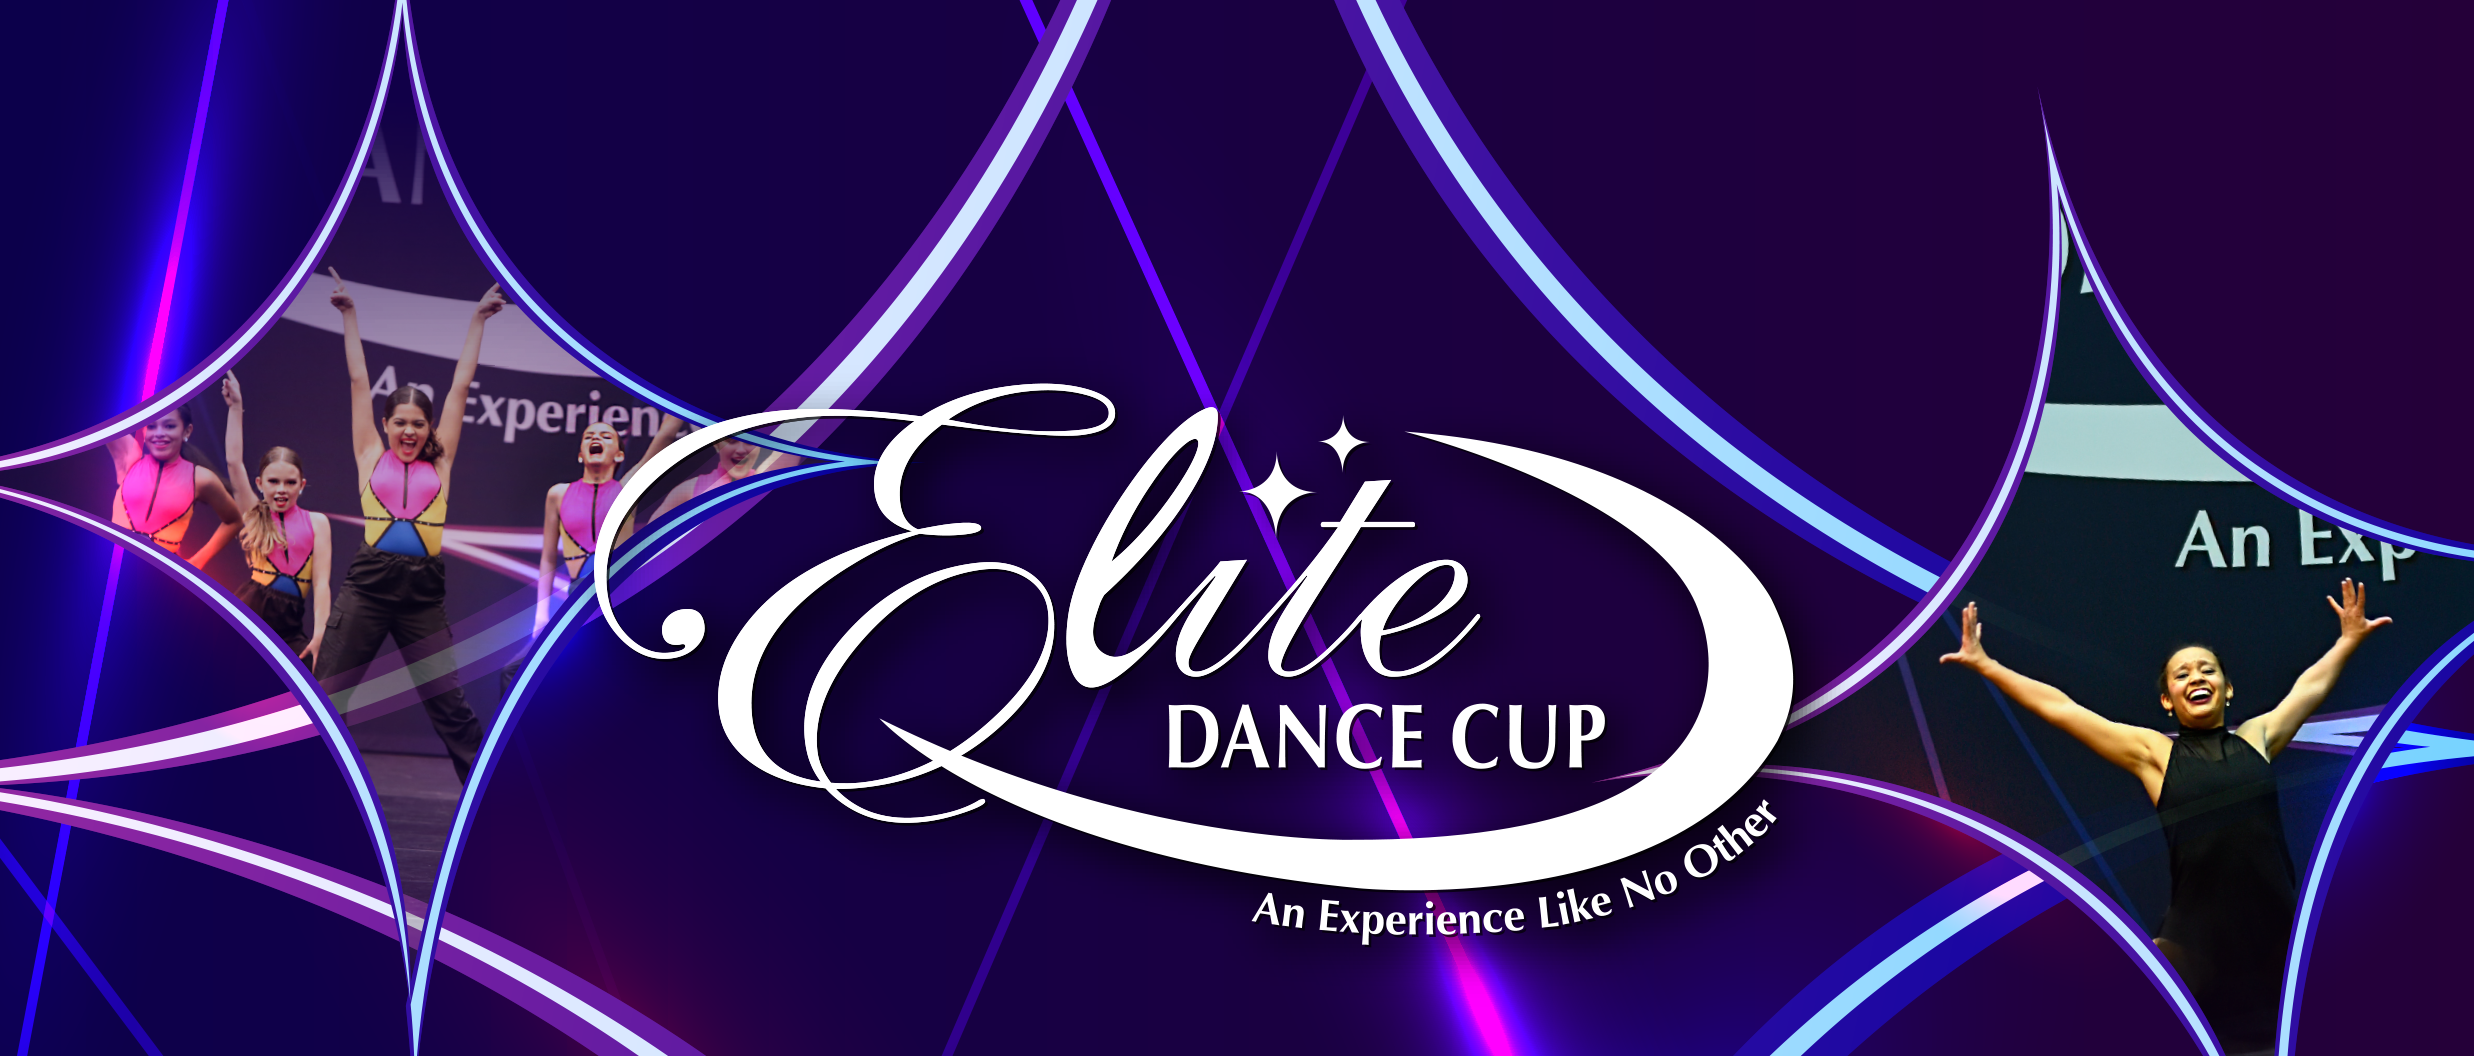 Elite Dance Cup National & Regional Dance Competition!